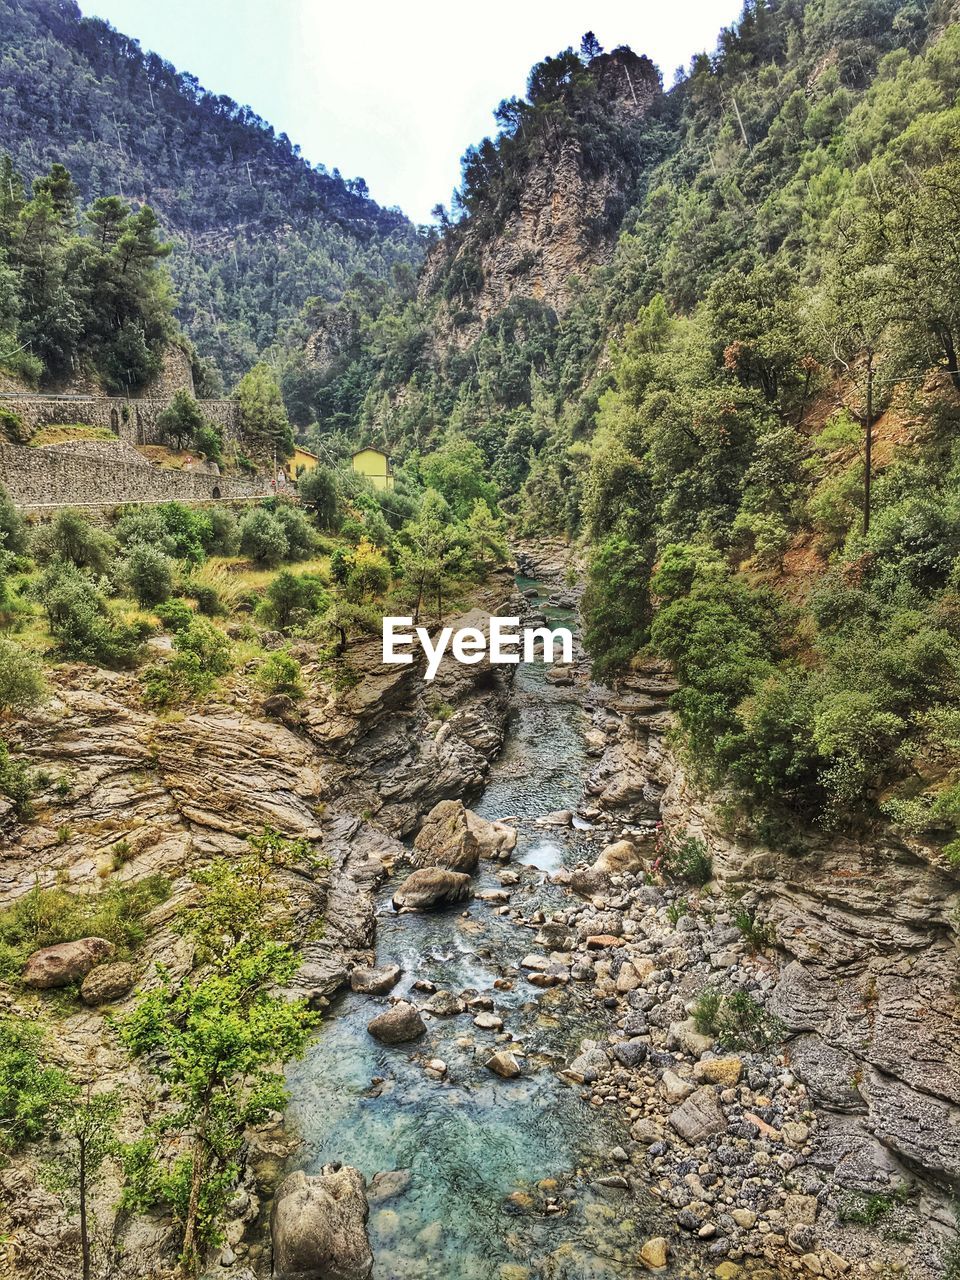 SCENIC VIEW OF RIVER AMIDST MOUNTAINS